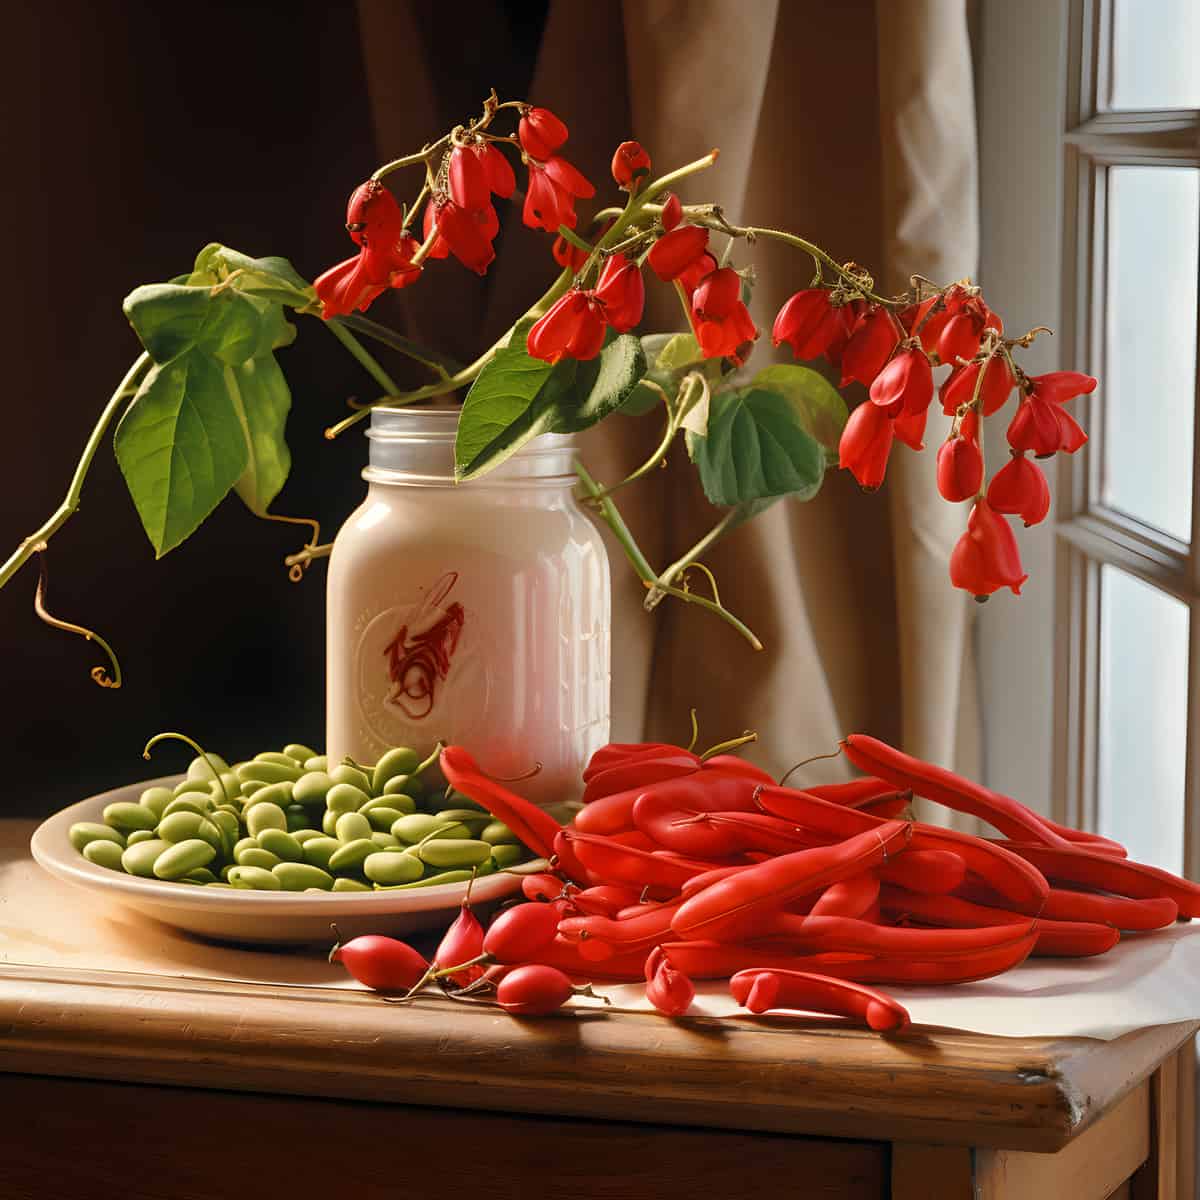 Scarlet Runner Beans on a kitchen counter